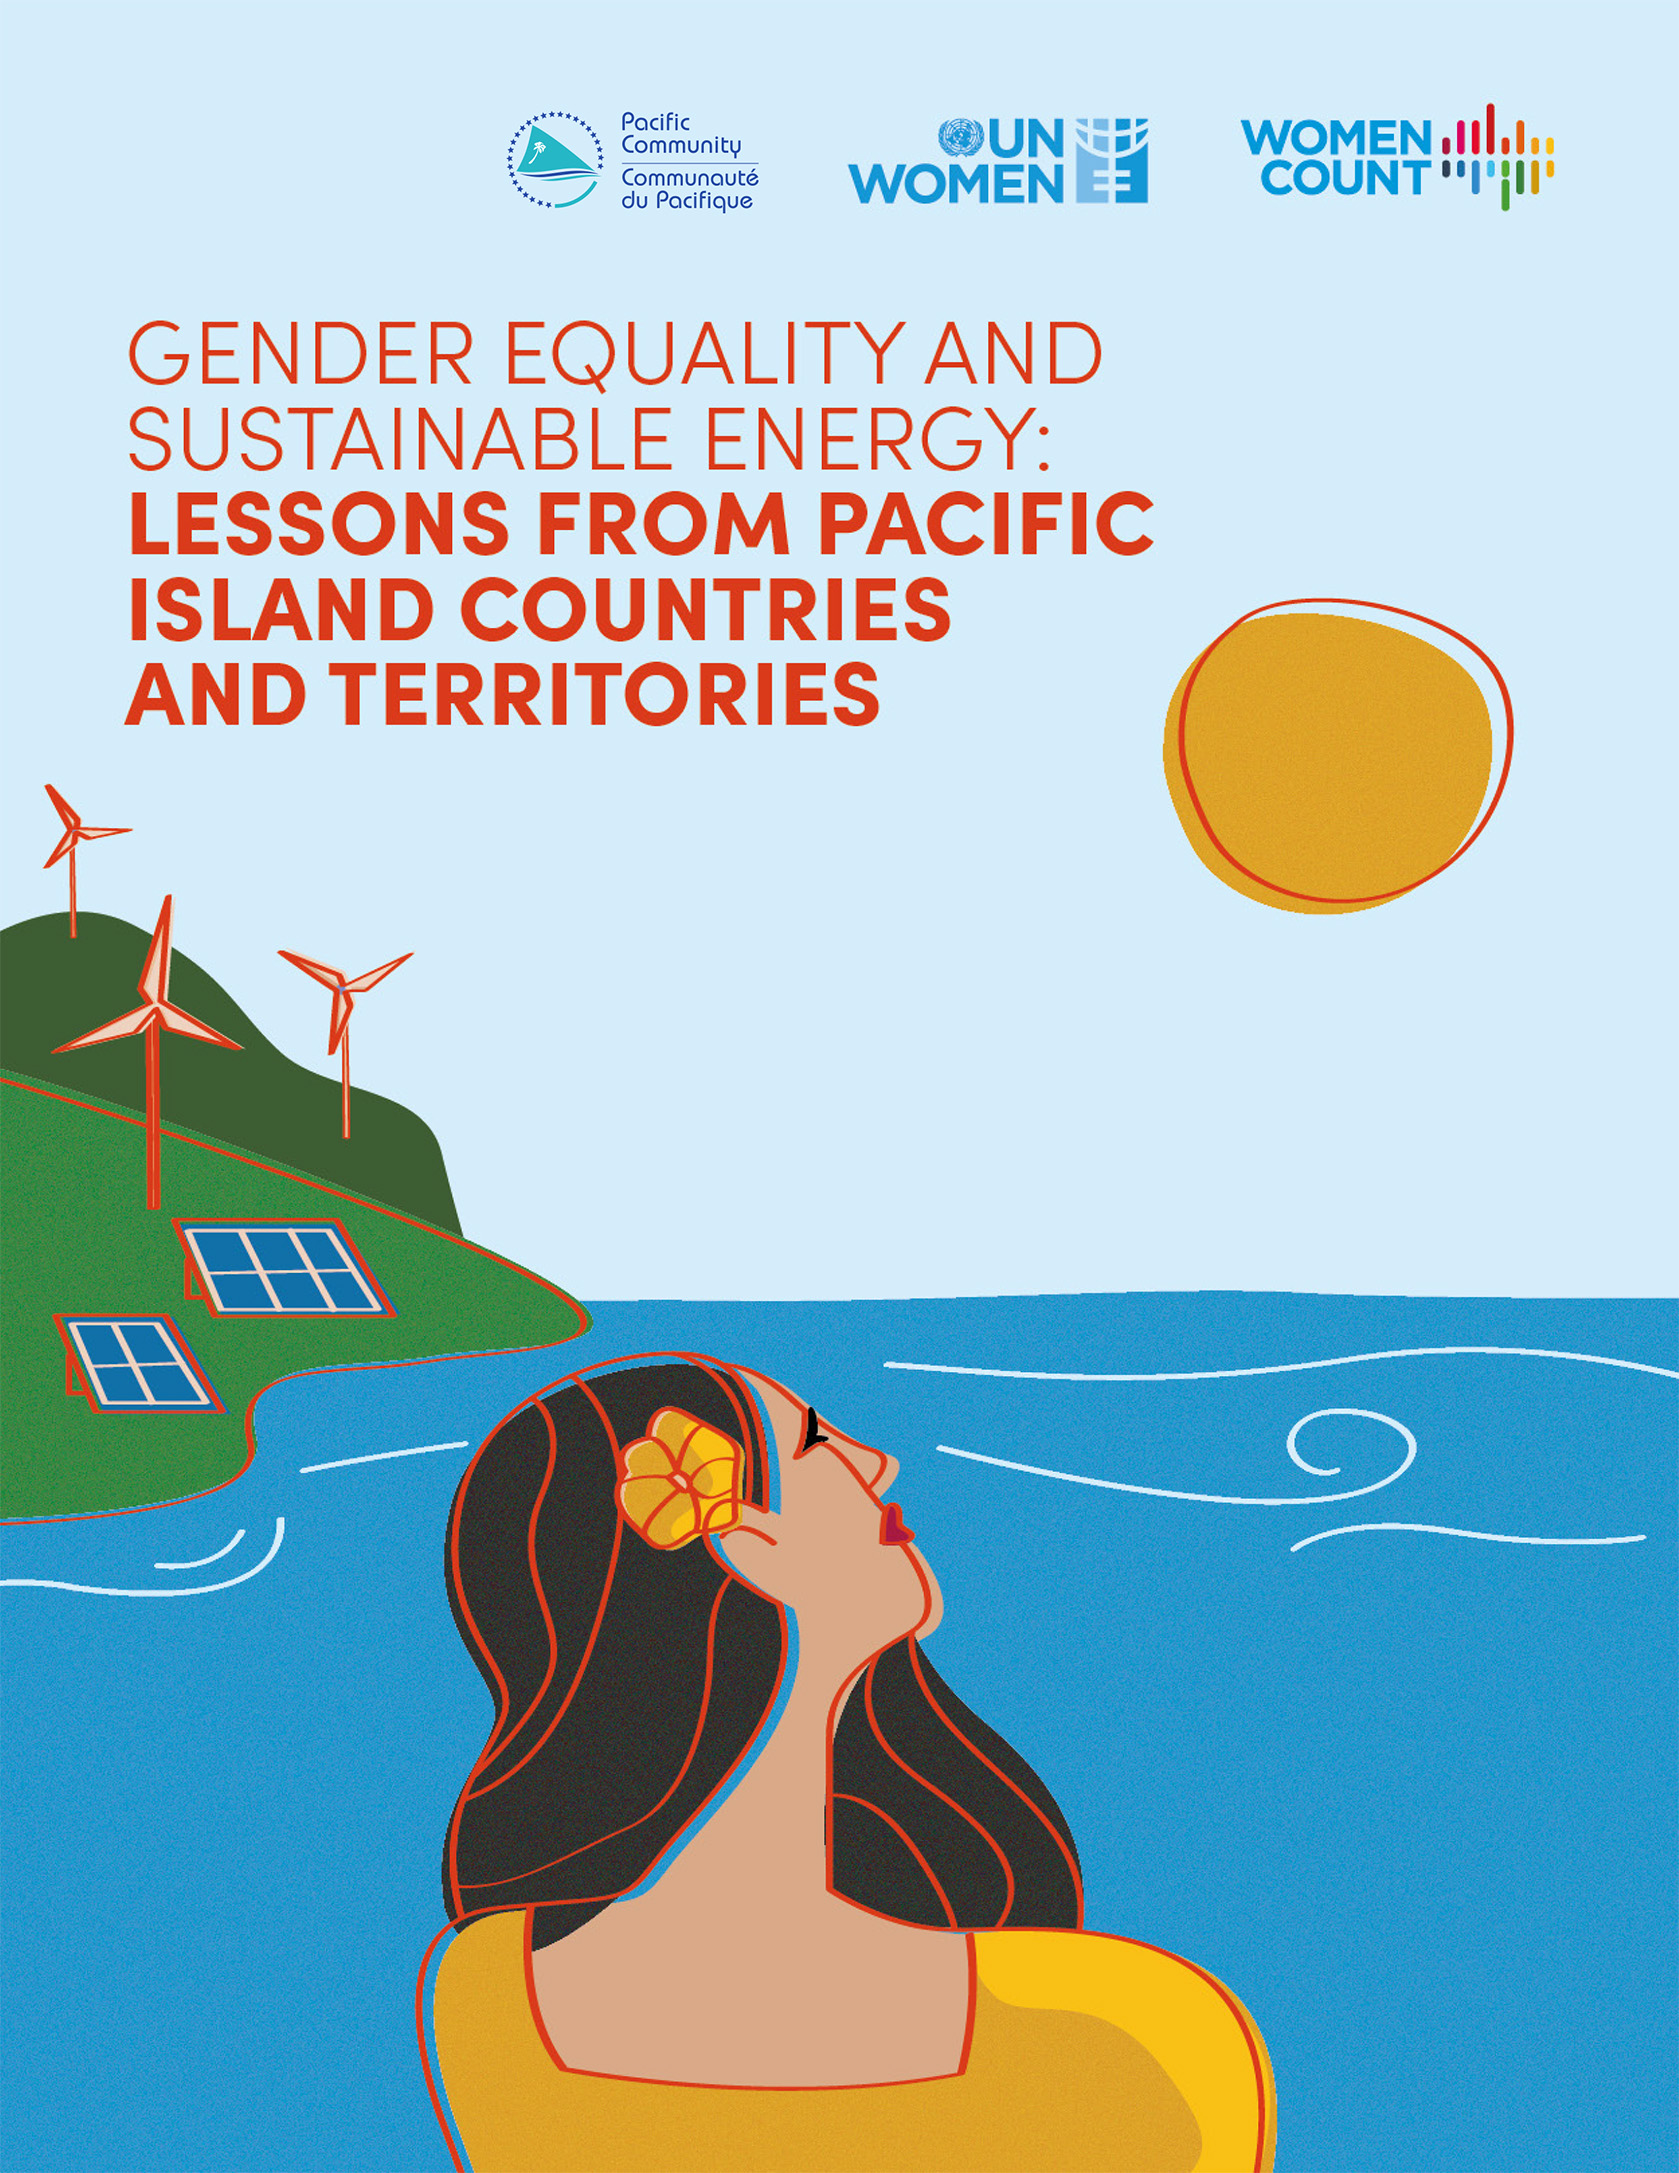 Gender equality and sustainable energy: Lessons from Pacific Island countries and territories